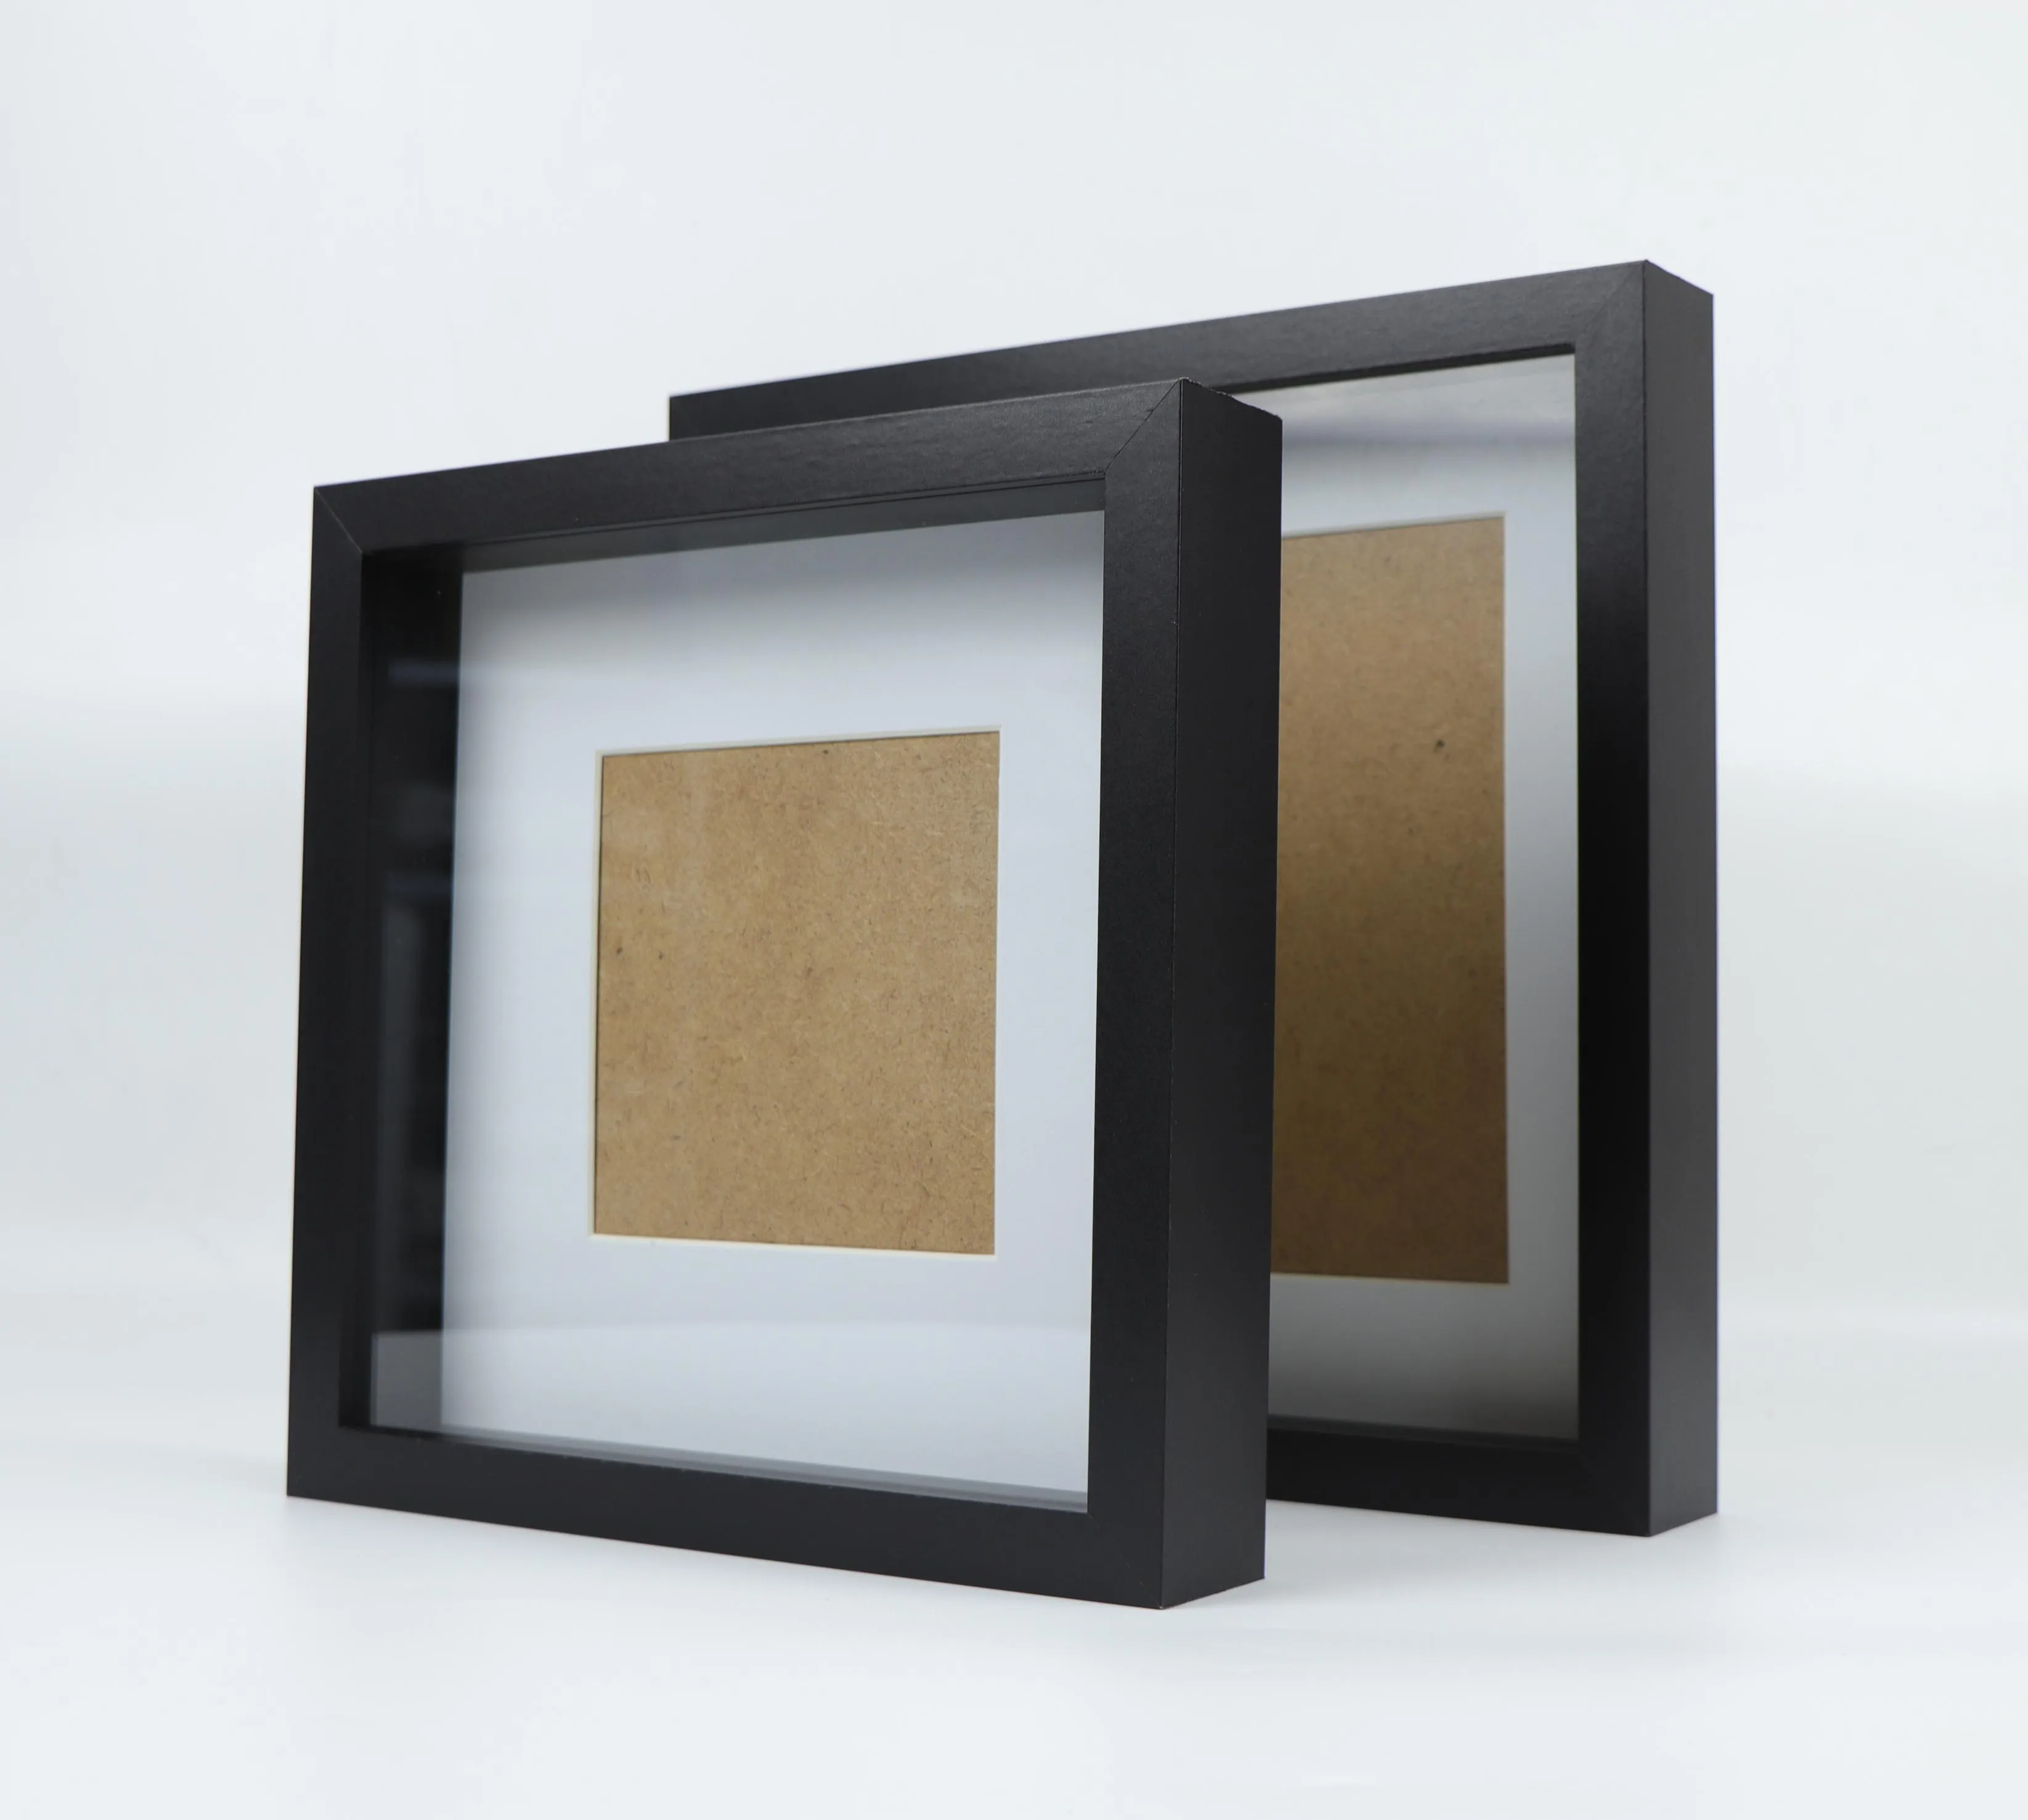 Deep Photo Frame,11x11" 12x12" 16x16" Shadow Box Picture Frame,Factory Stock - Buy Deep Photo Frame,11x11" 12x12" Shadow Picture Stock Product on Alibaba.com